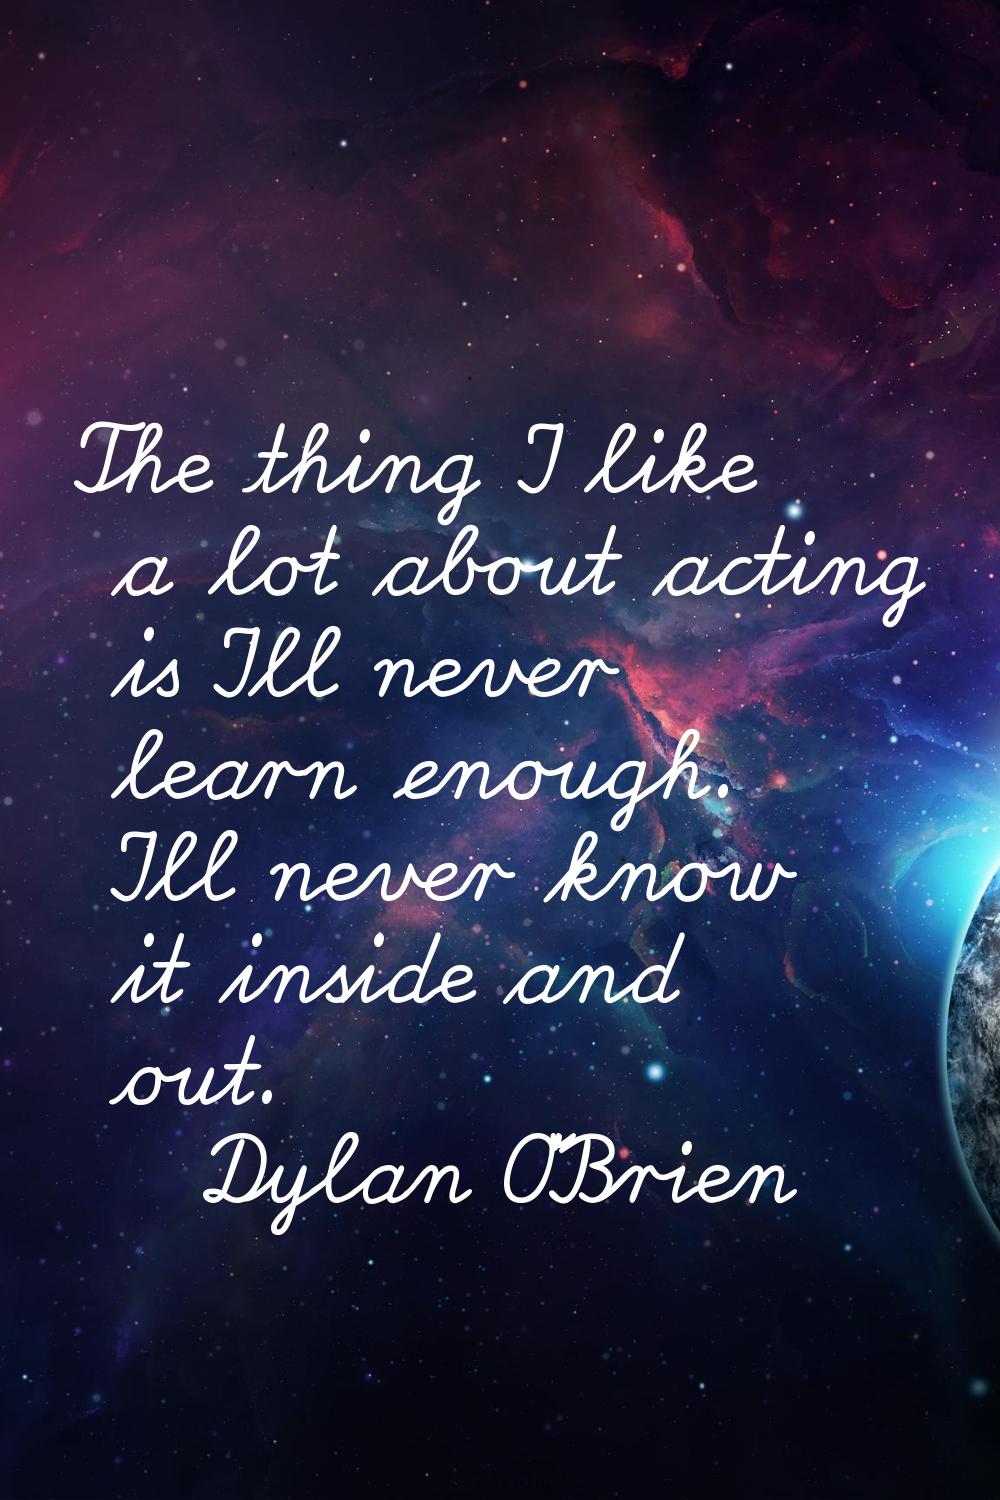 The thing I like a lot about acting is I'll never learn enough. I'll never know it inside and out.